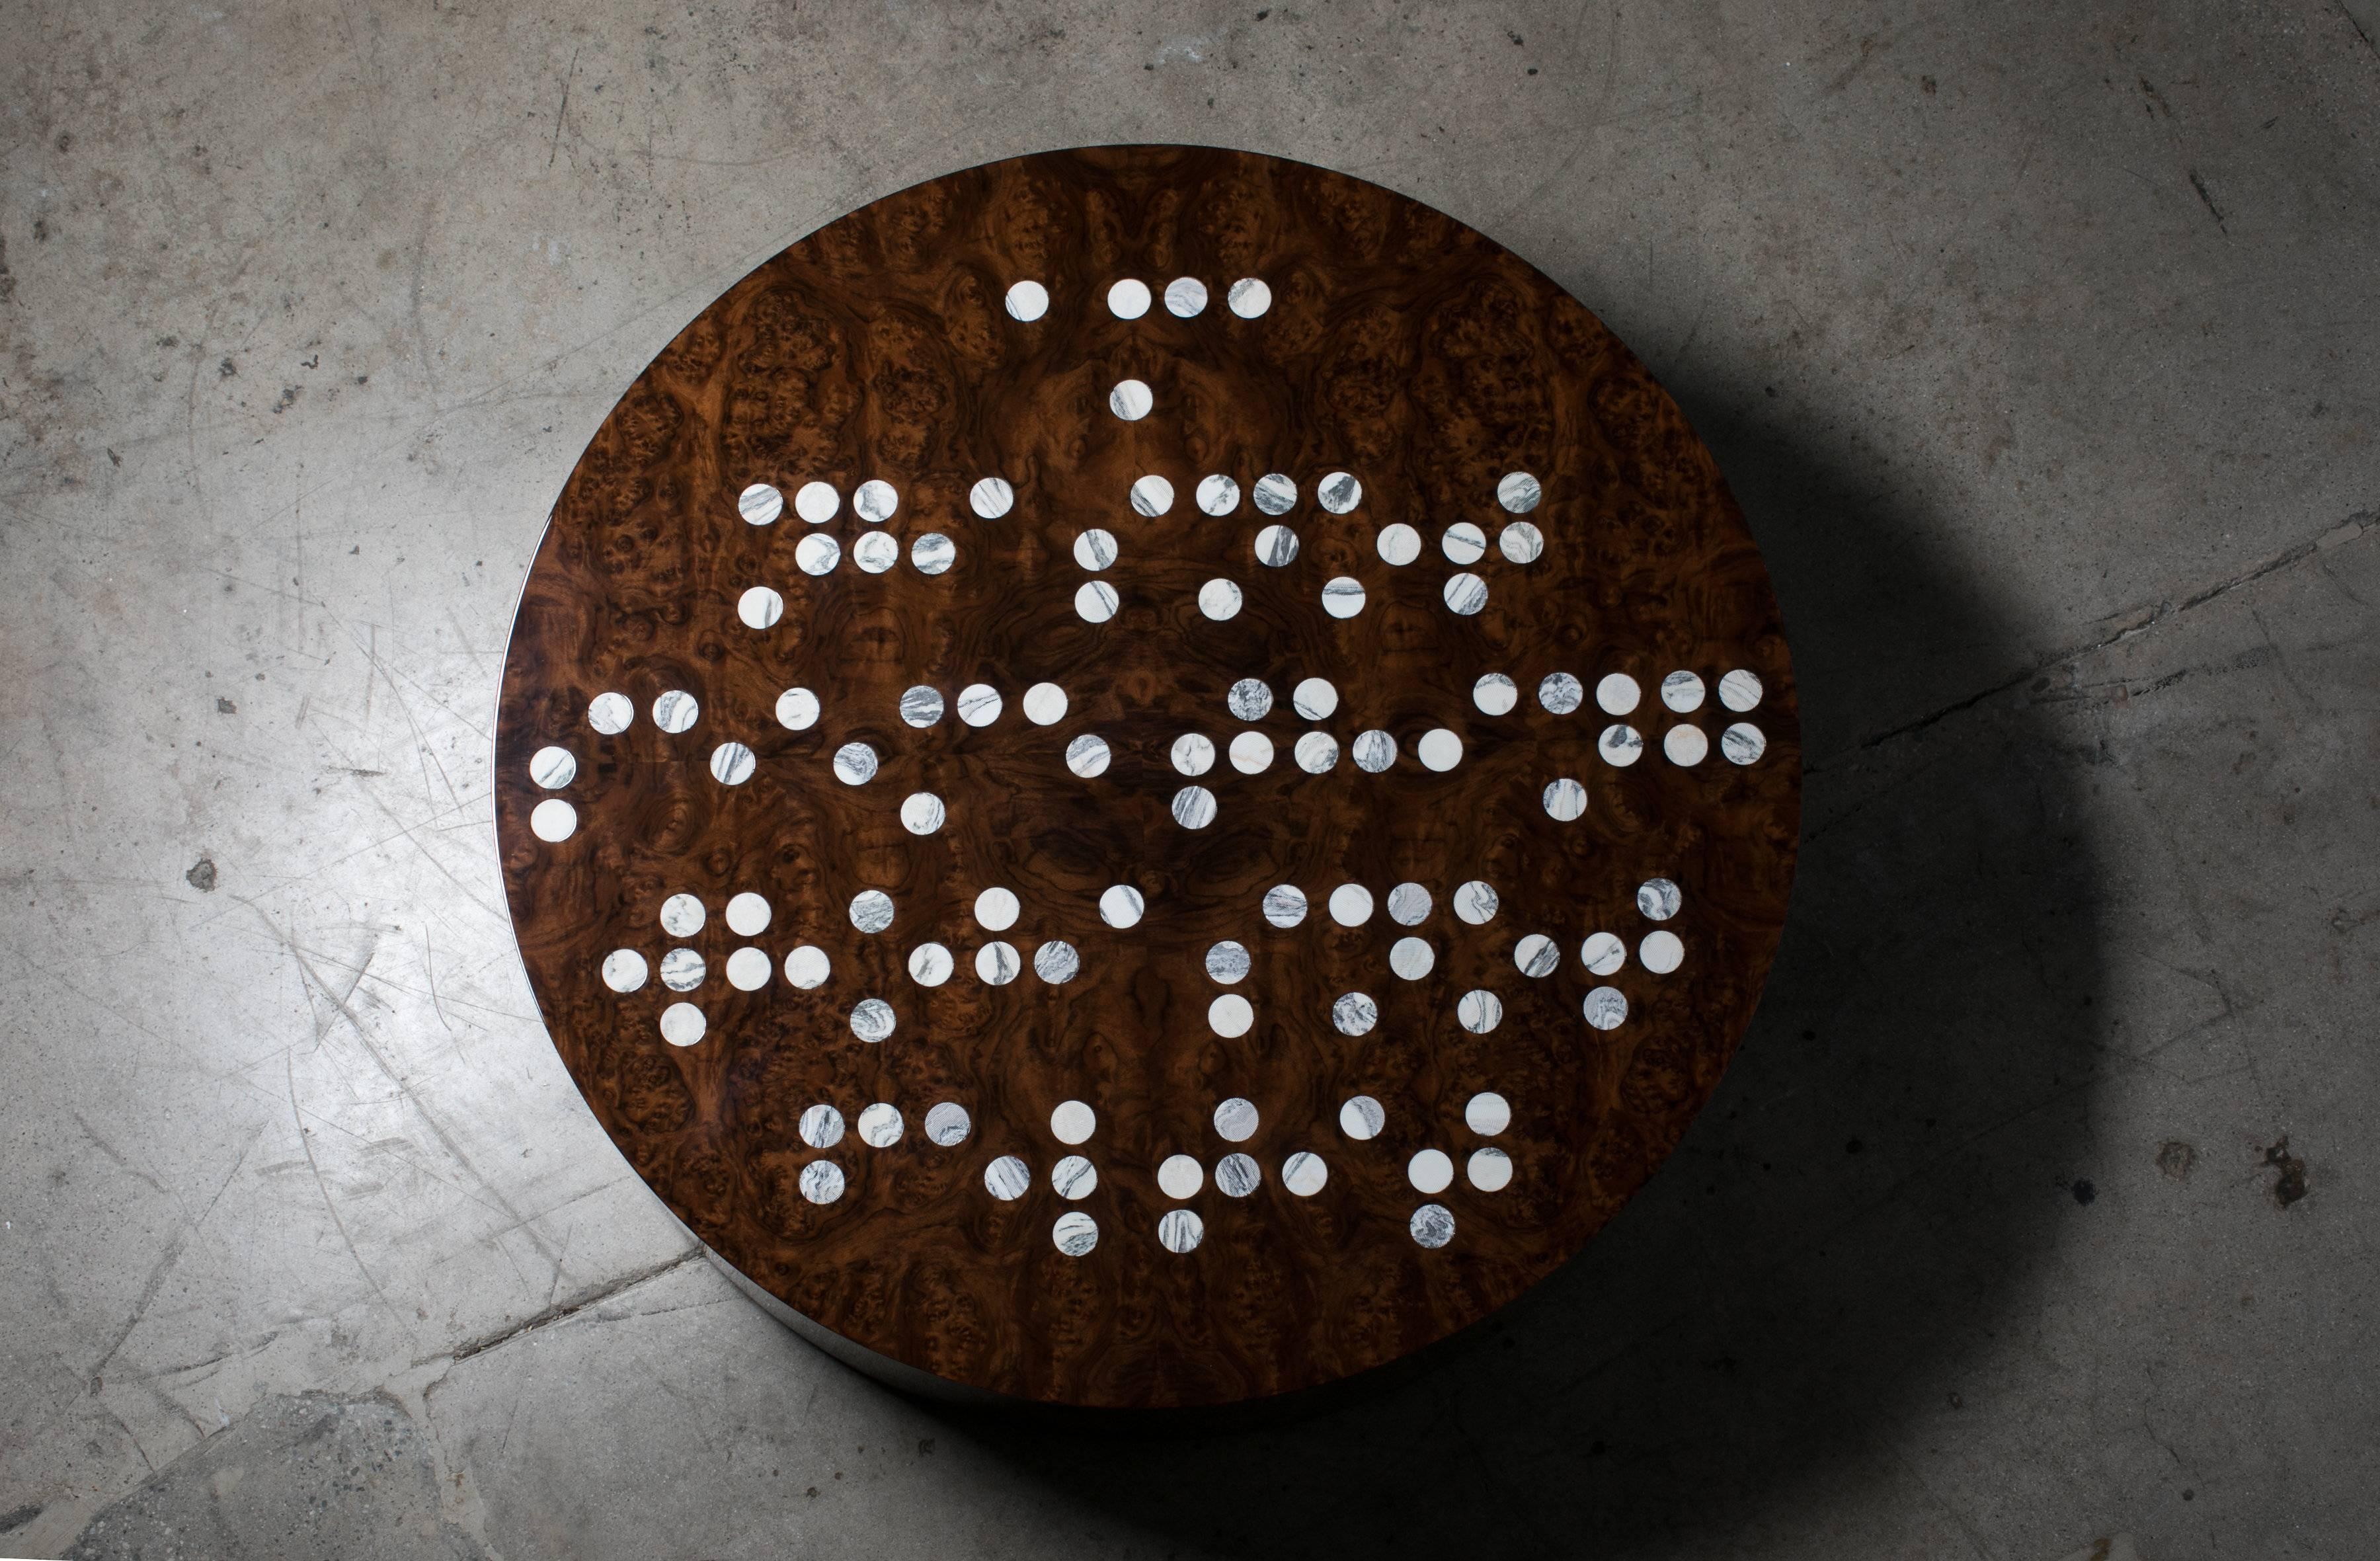 Inspired by the role of touch in visual processing, Taction is a one-of-a-kind table with a quote from Henry David Thoreau: 